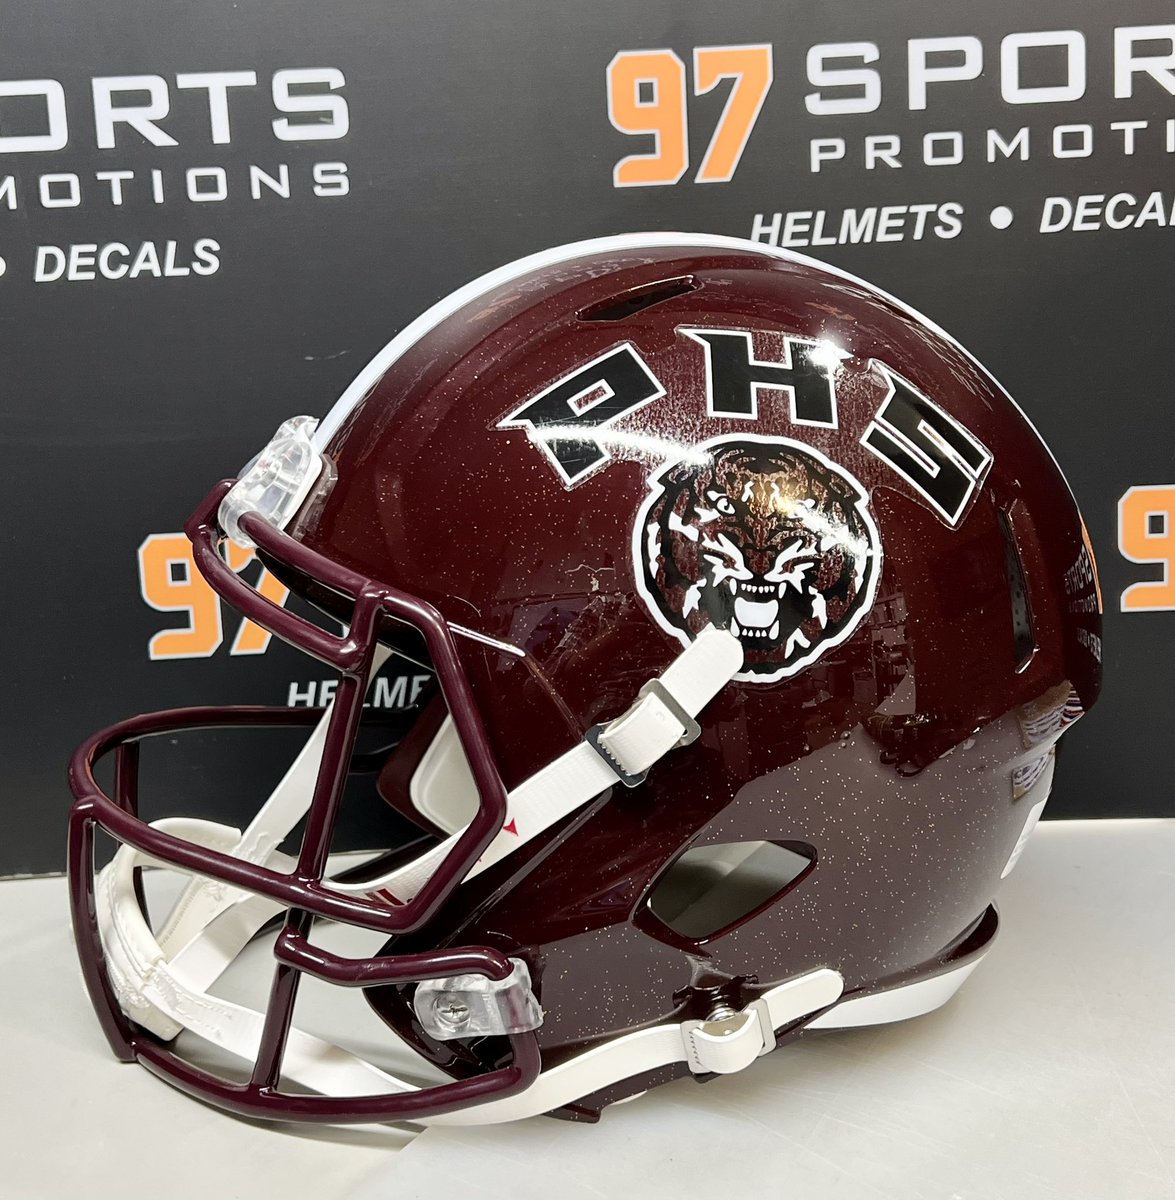 Couldn’t be more excited to work with one of the best this season! Thank you to @Coach_CTyson for letting us add another Florida school to our decal family! Love @PHS_TigersFB new helmets! @VisitPensacola @cityofpensacola @DowntownPcola #minihelmets #helmetdecals #PensacolaTigers